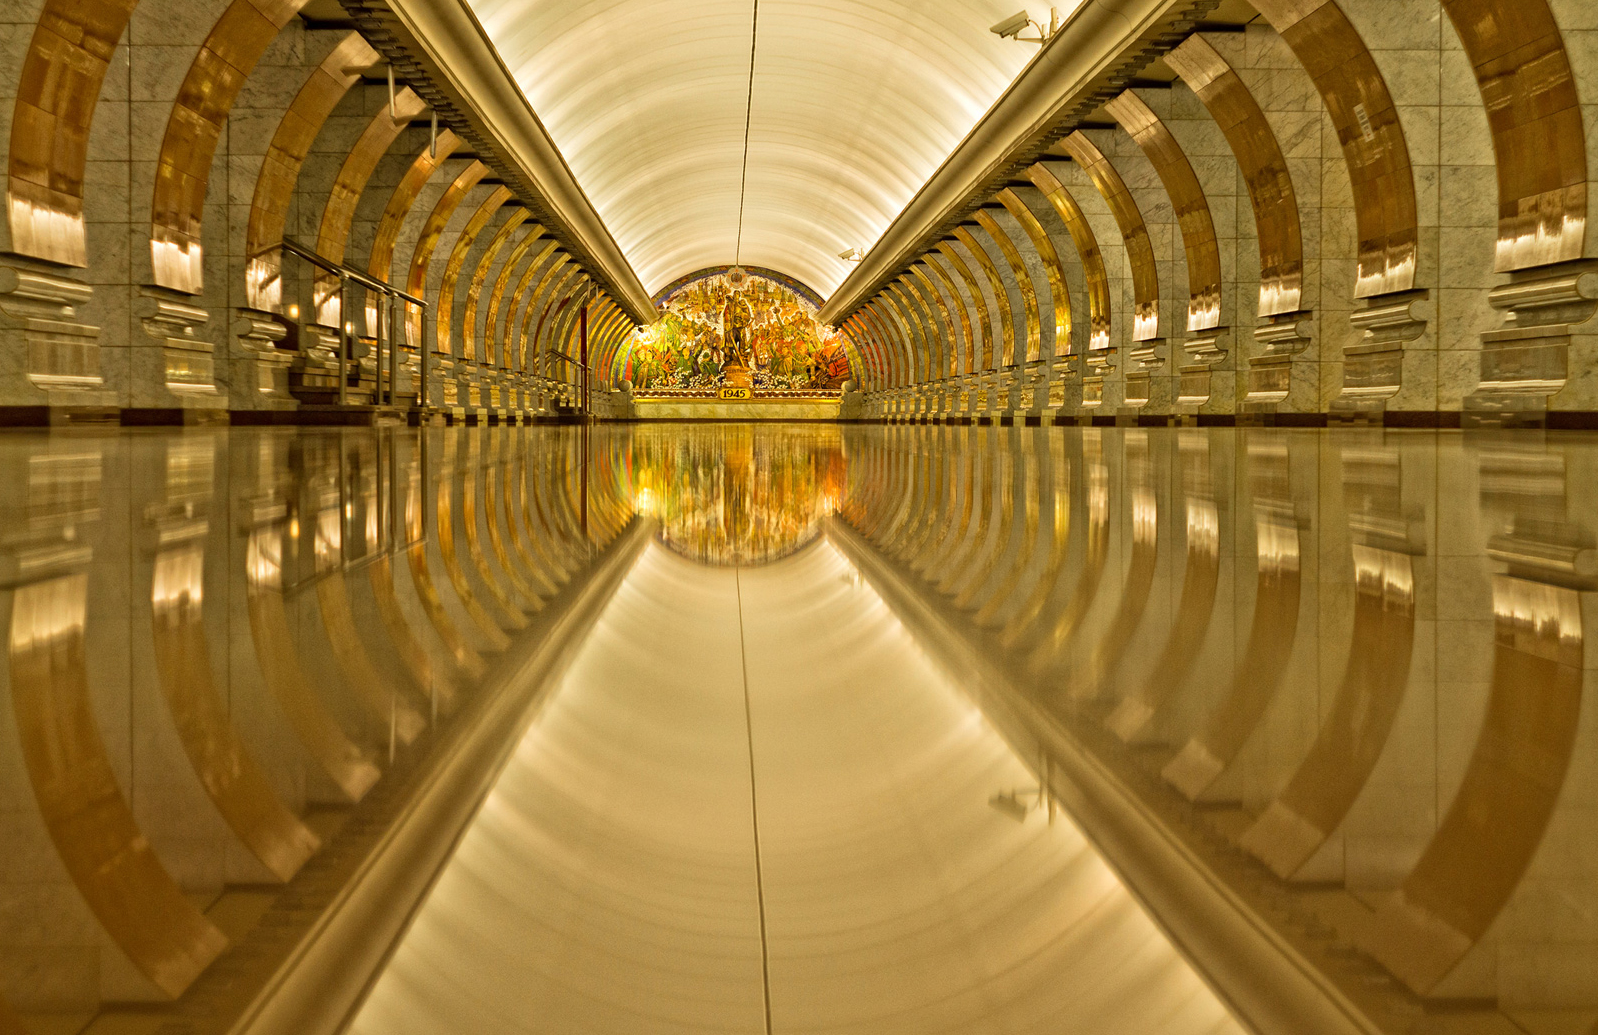 20 Subway Stations With The World's Most Amazing Architecture